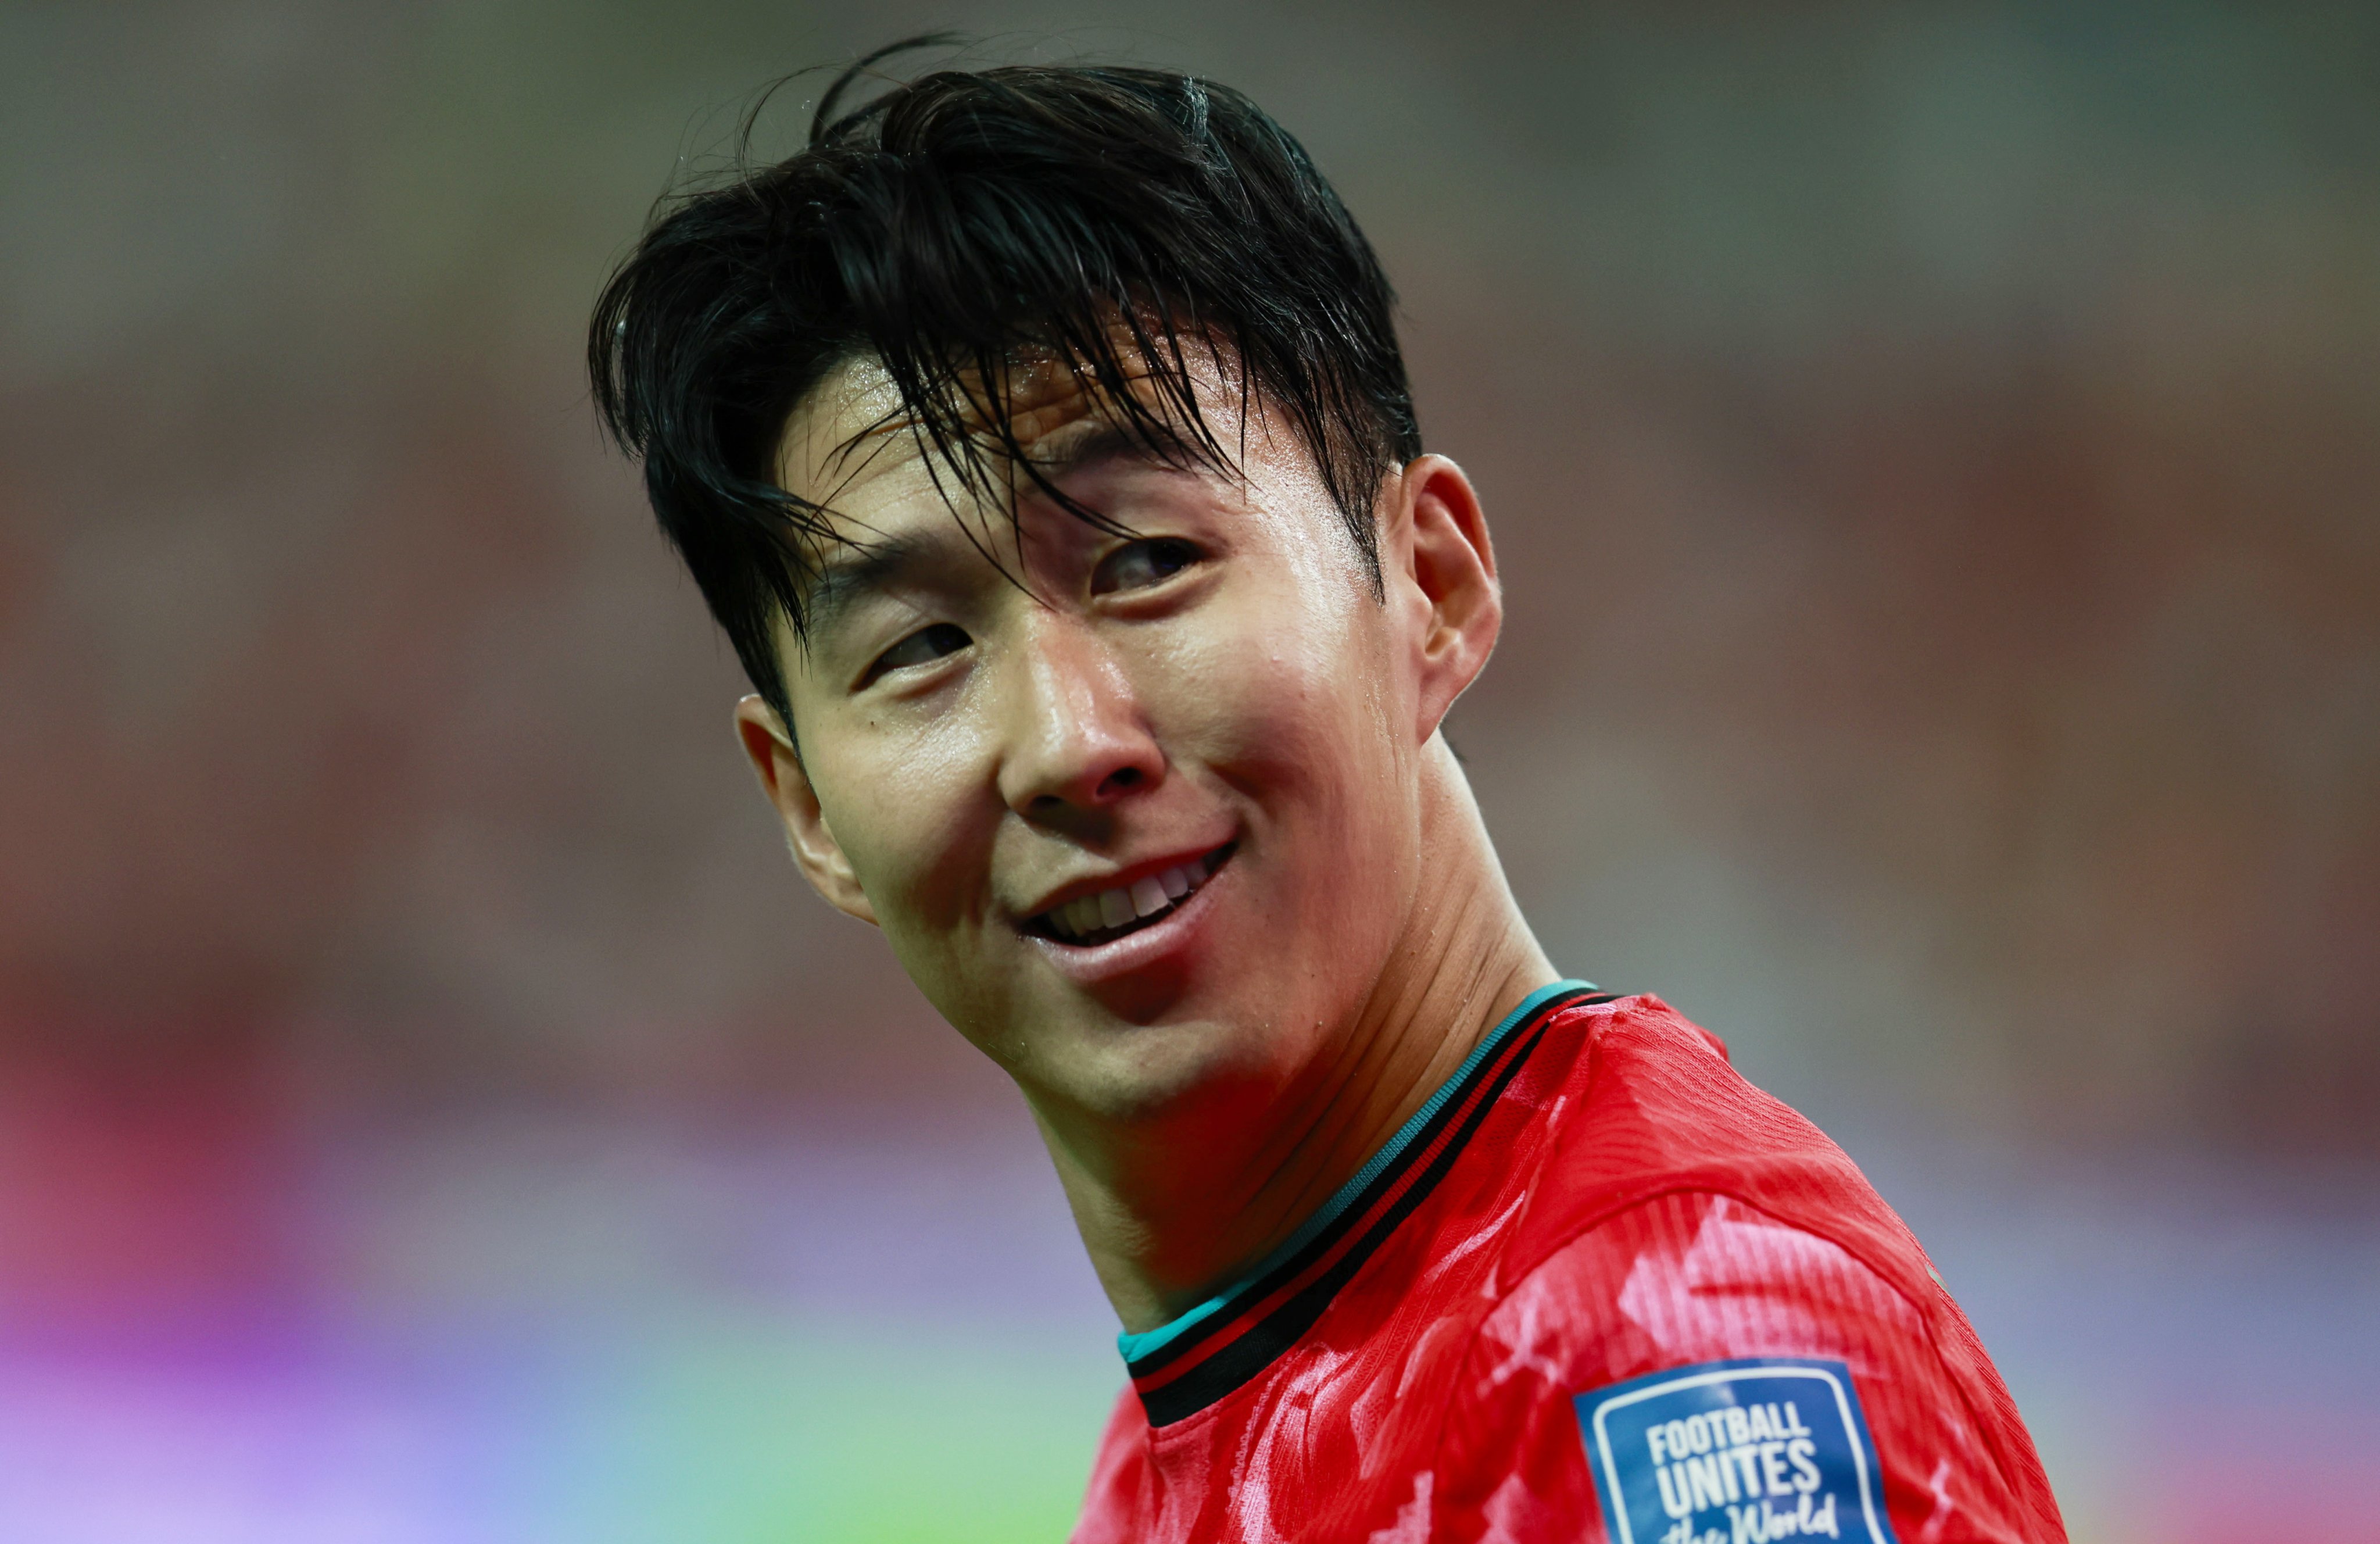 South Korean Son Heung-min said his Spurs team mate “would not mean to ever intentionally say something offensive”. Photo: EPA-EFE